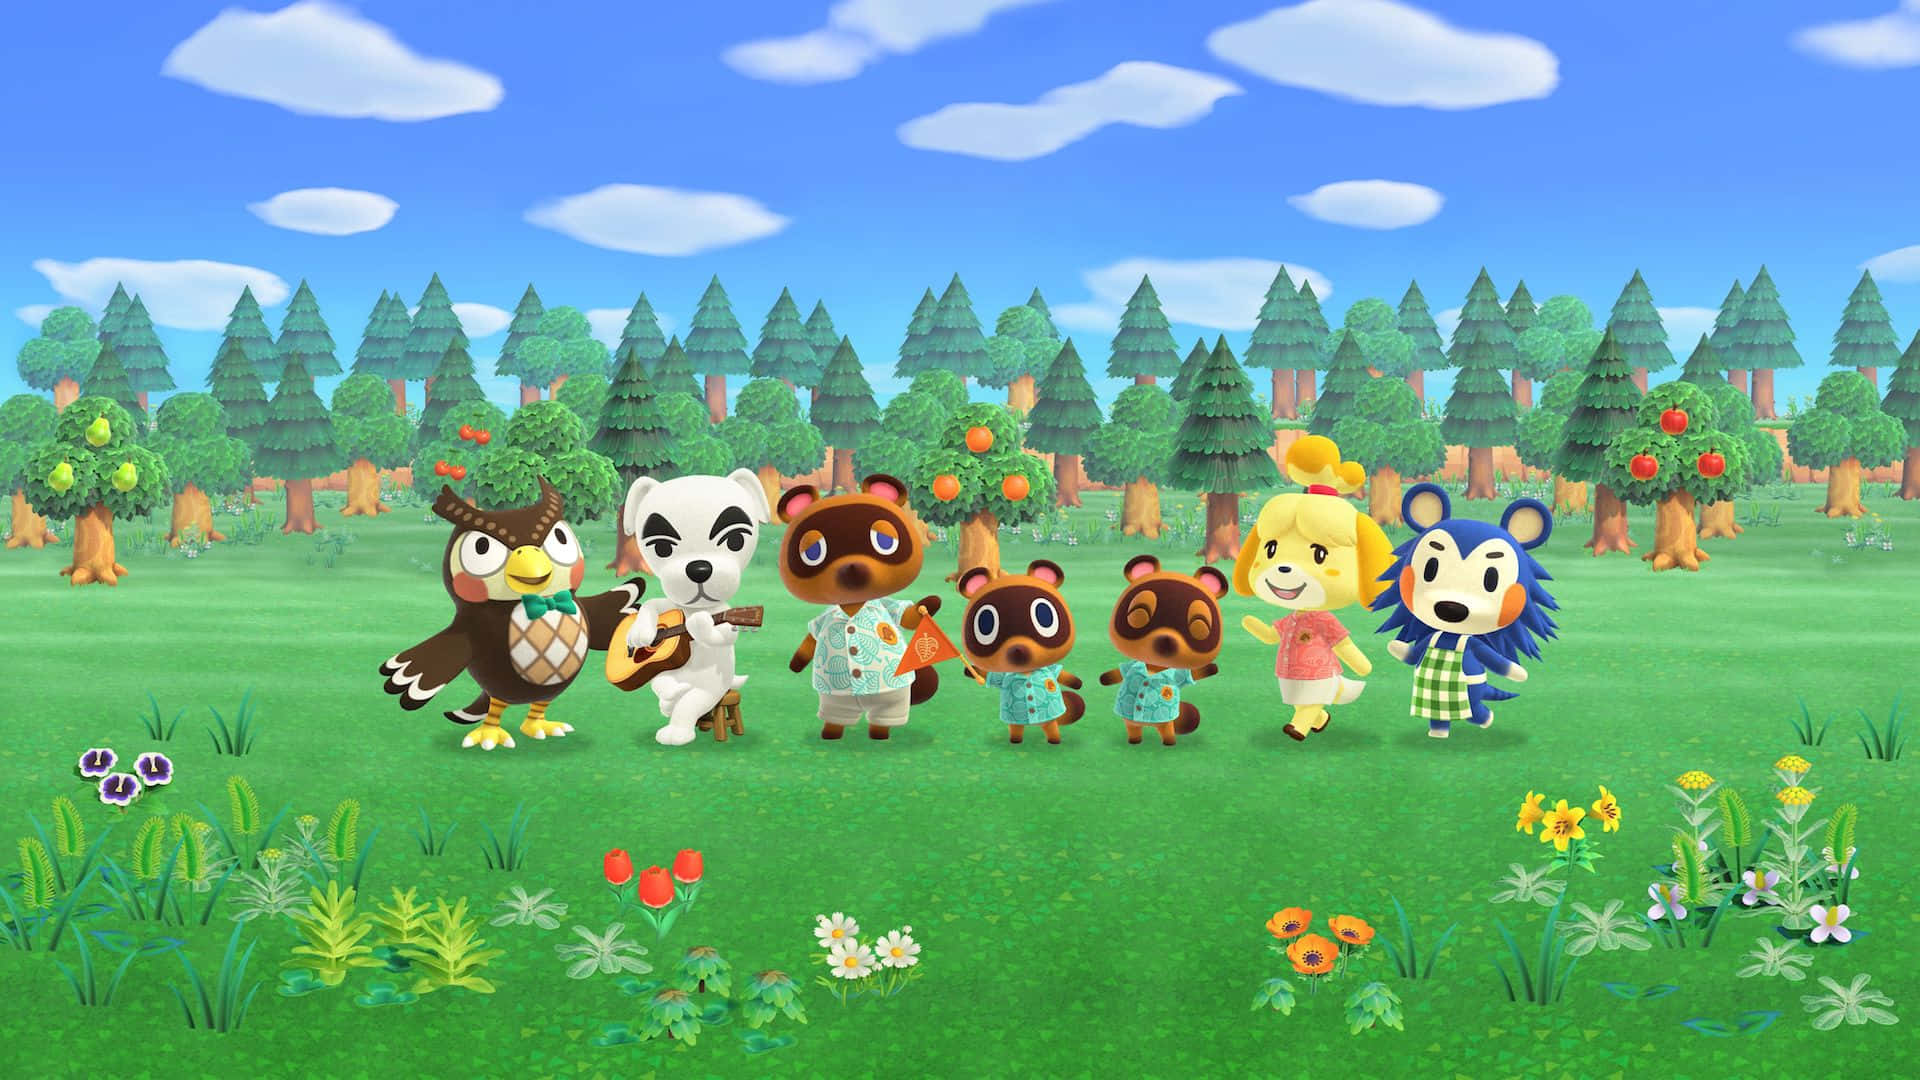 It's a perfect day in Animal Crossing